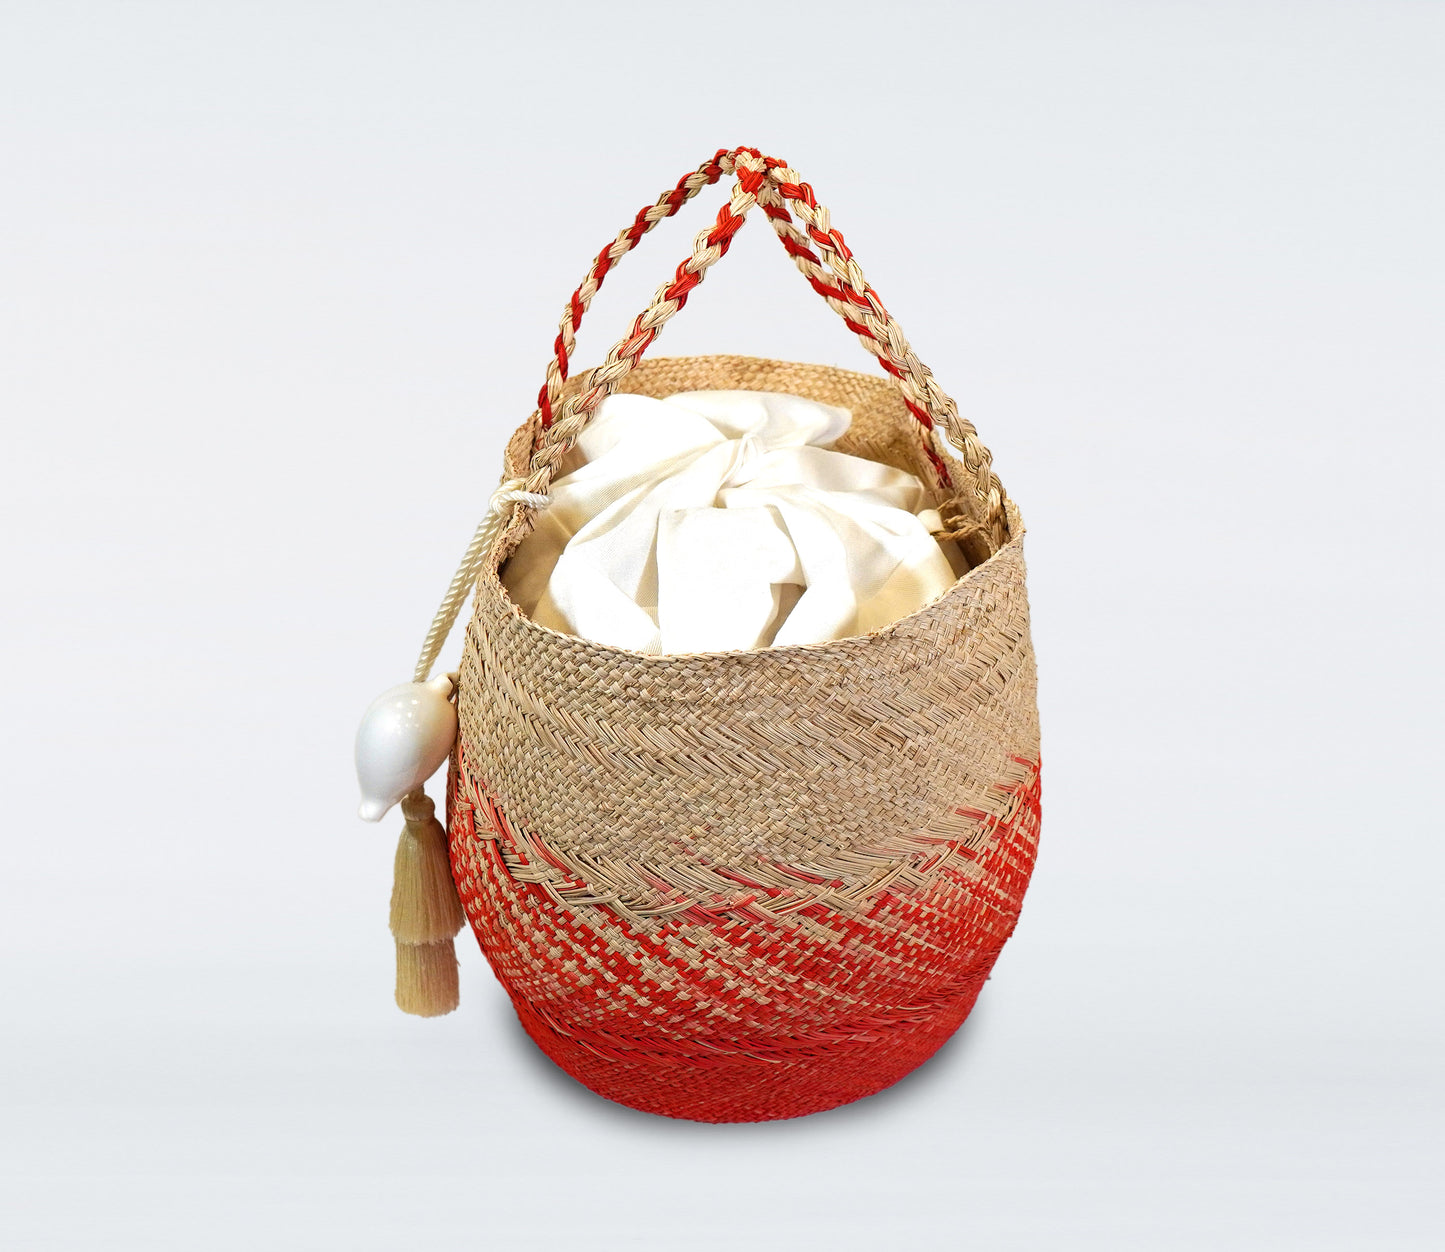 Medium red basket in straw, cotton bag and natural shell.